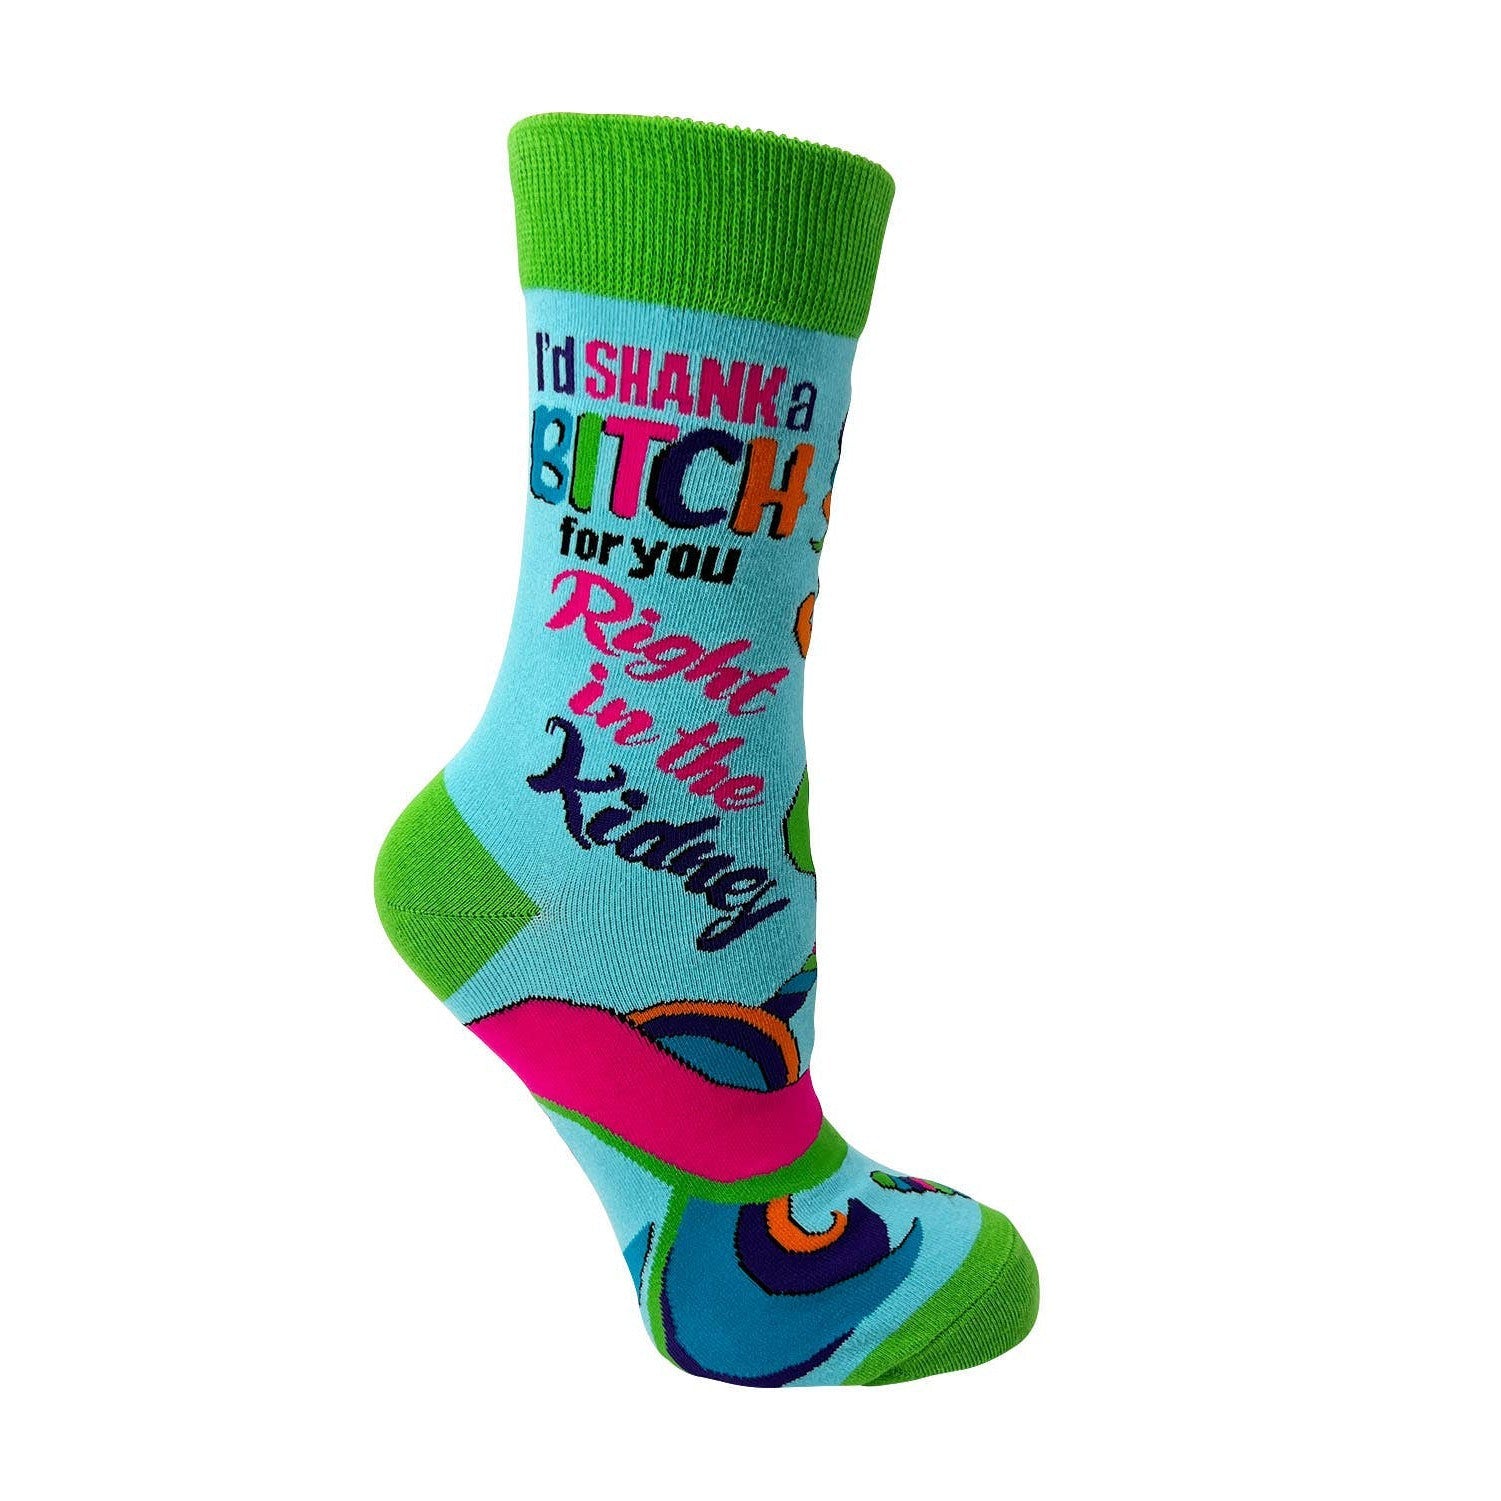 I'd Shank a Bitch for You Right in The Kidney Ladies' Socks | Funny Women's Novelty Crew Socks